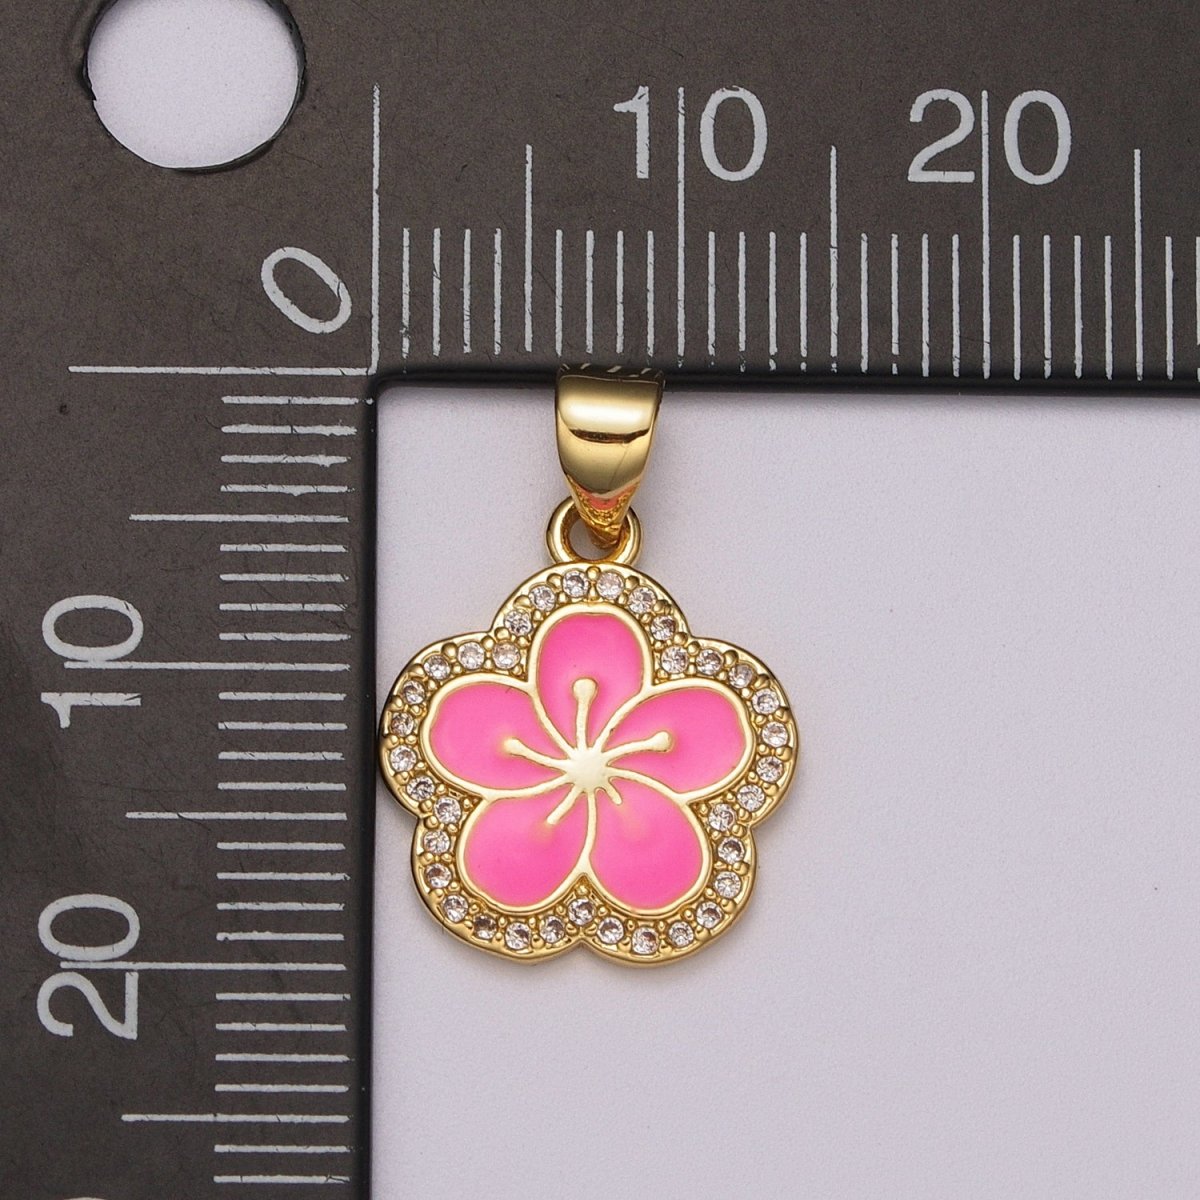 OS White Pink Hibiscus Charms, 21*14mm, Flower Charm Necklace Pendant Bracelet Charm, Jewelry Supplies, Enamel Charm Hawaiian Inspired N-1416 N-1417 - DLUXCA